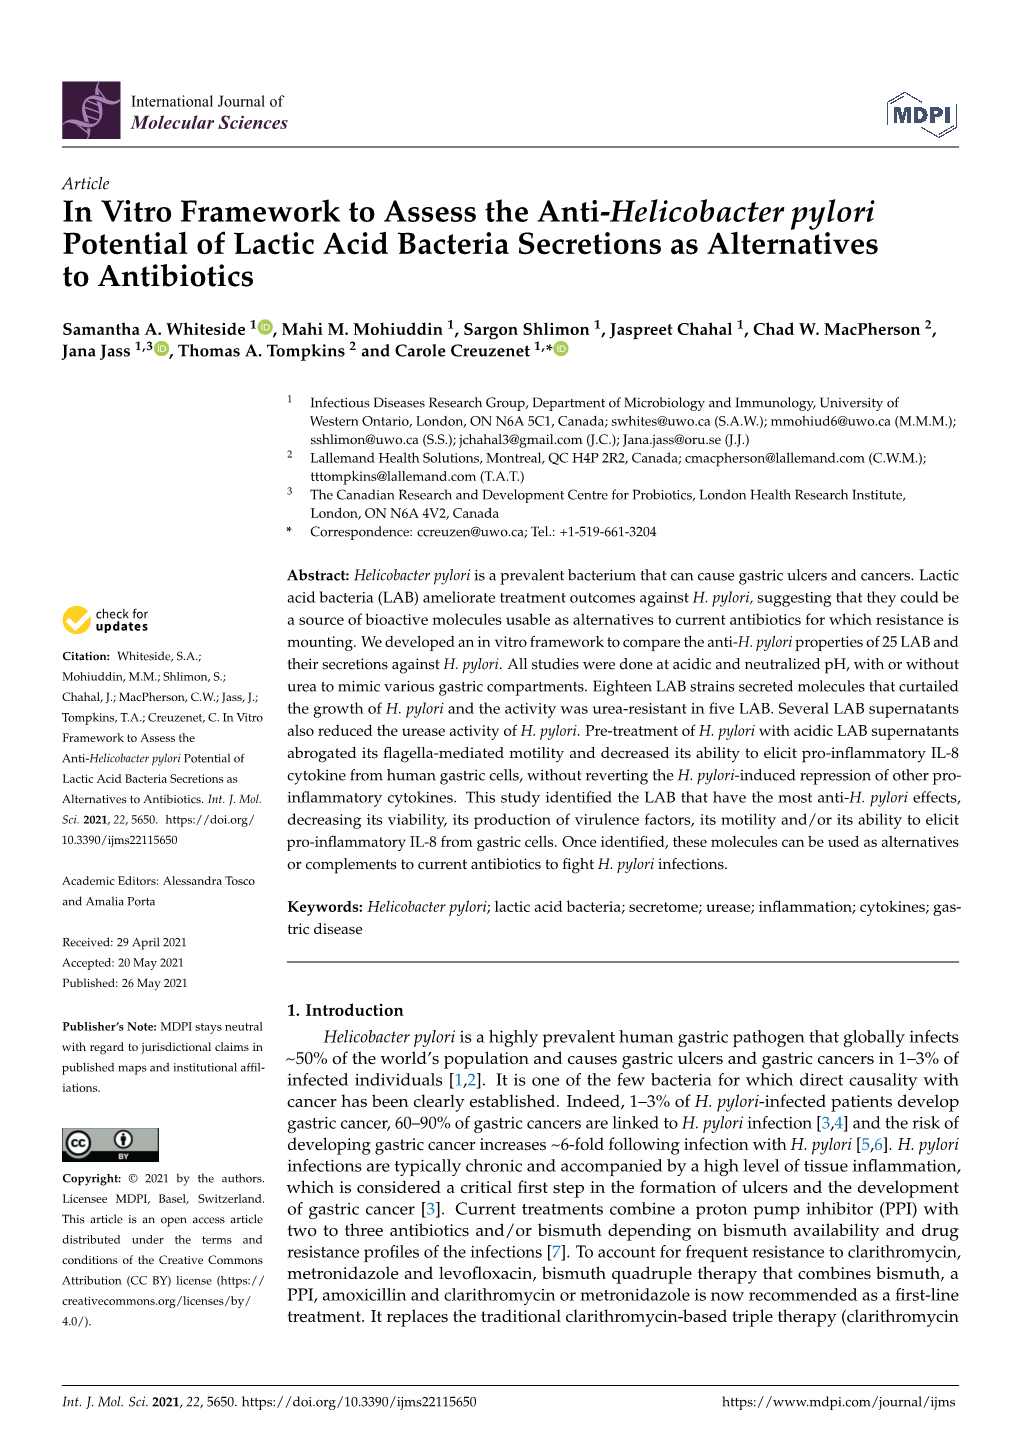 In Vitro Framework to Assess the Anti-Helicobacter Pylori Potential of Lactic Acid Bacteria Secretions As Alternatives to Antibiotics